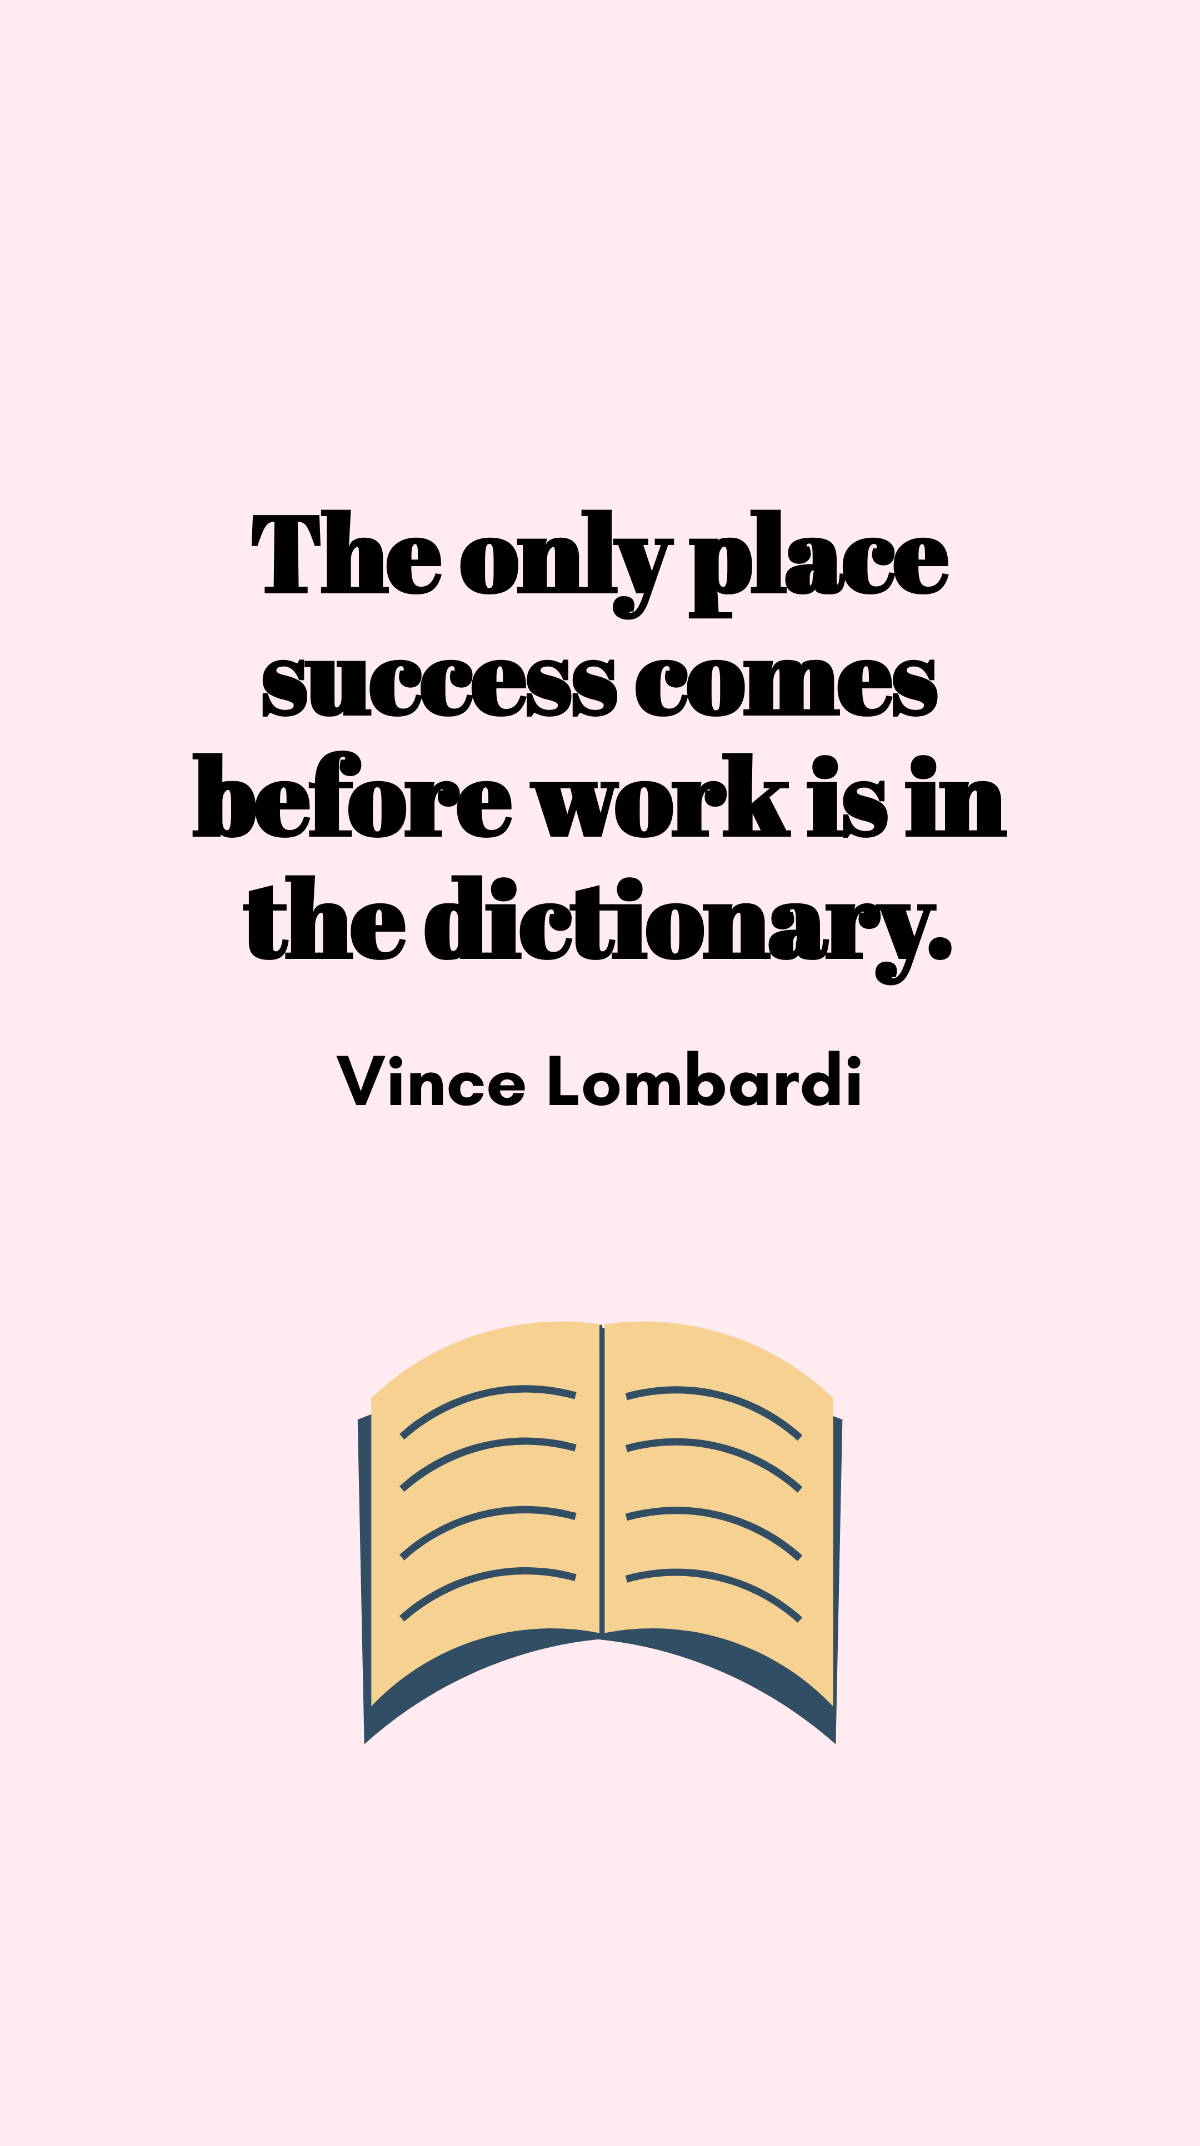 Free Vince Lombardi - The only place success comes before work is in the dictionary. Template